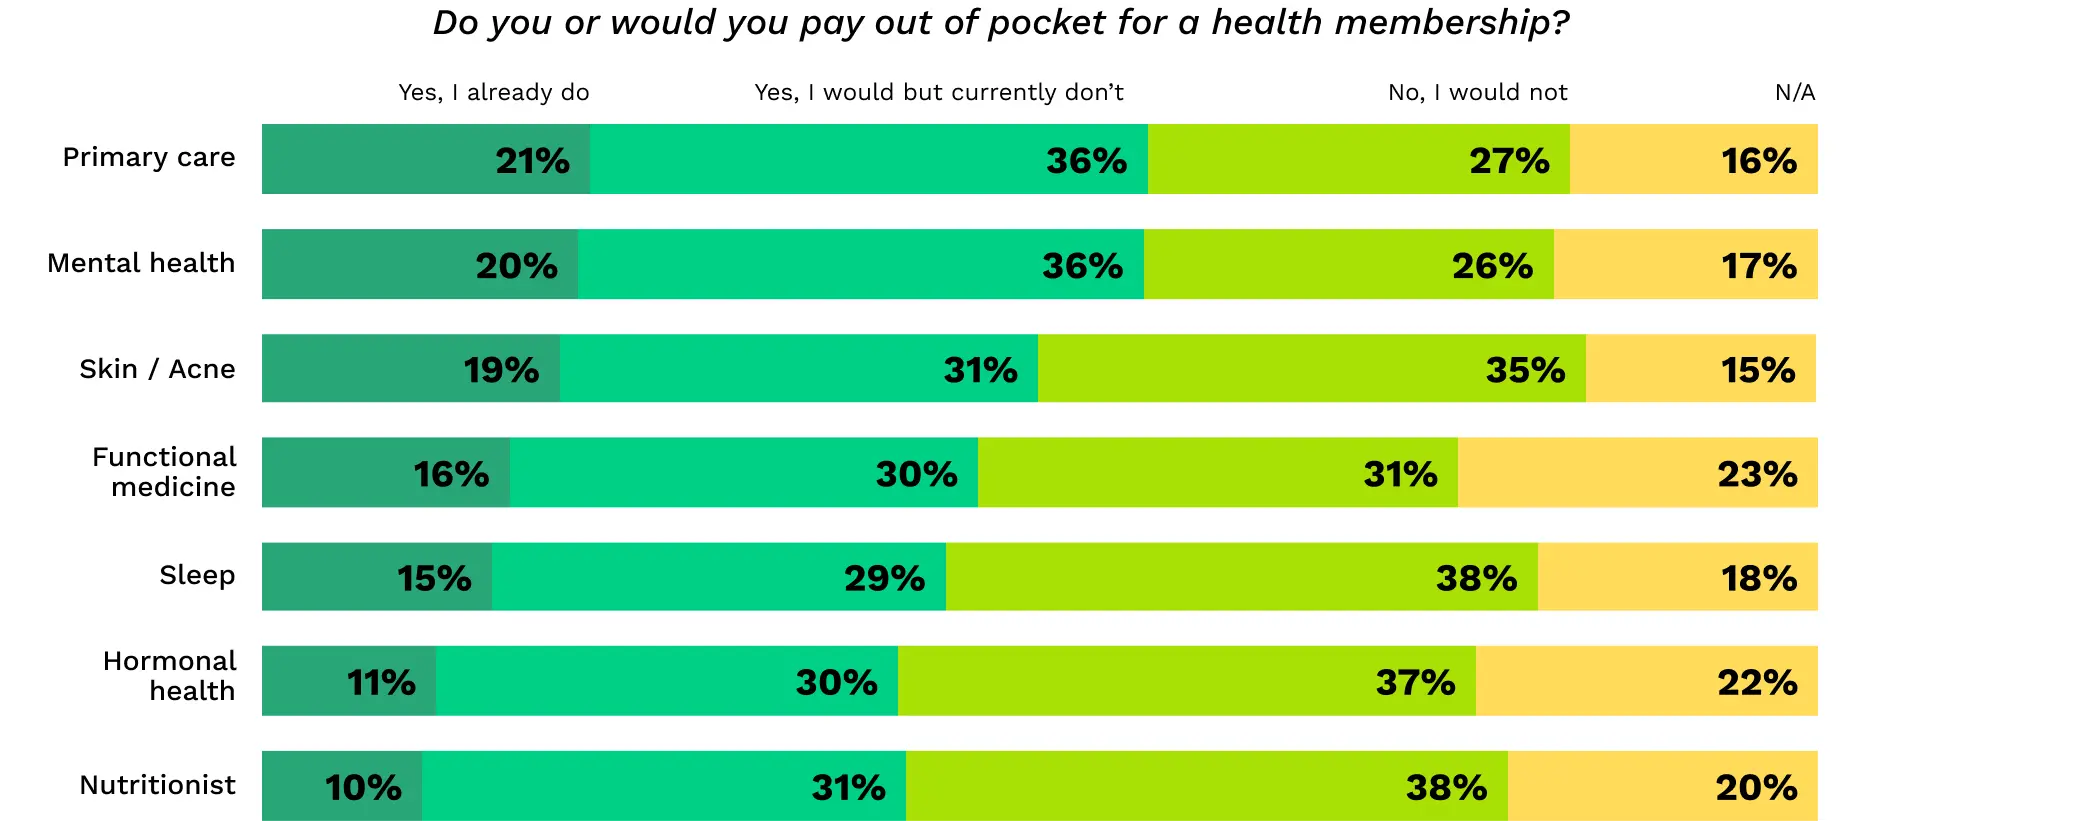 Do you or would you pay out of pocket for a health membership?